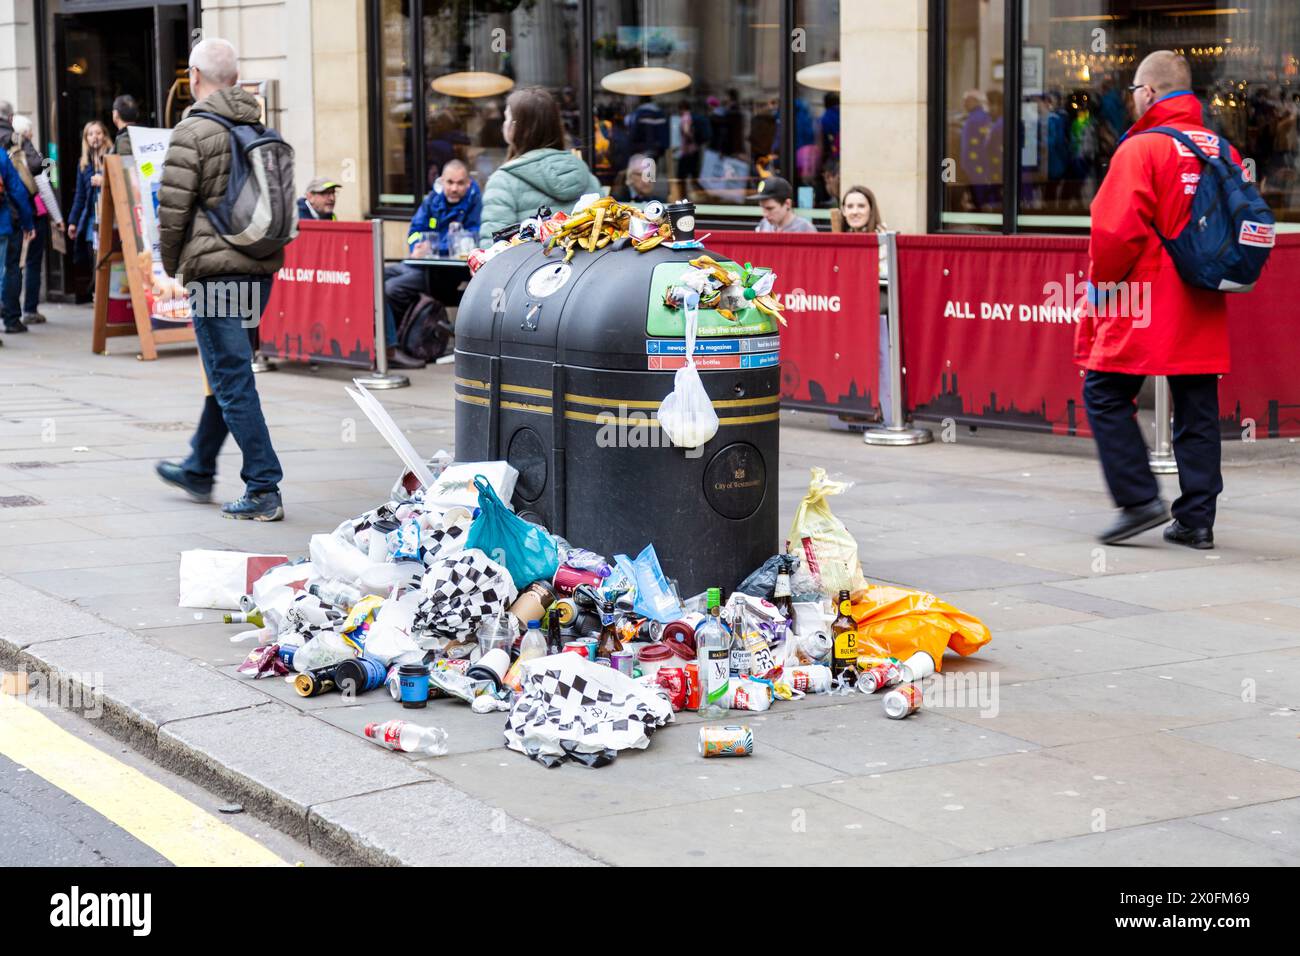 Full litter bin overflowing with rubbish in Central London, Westminster, London, England Stock Photo